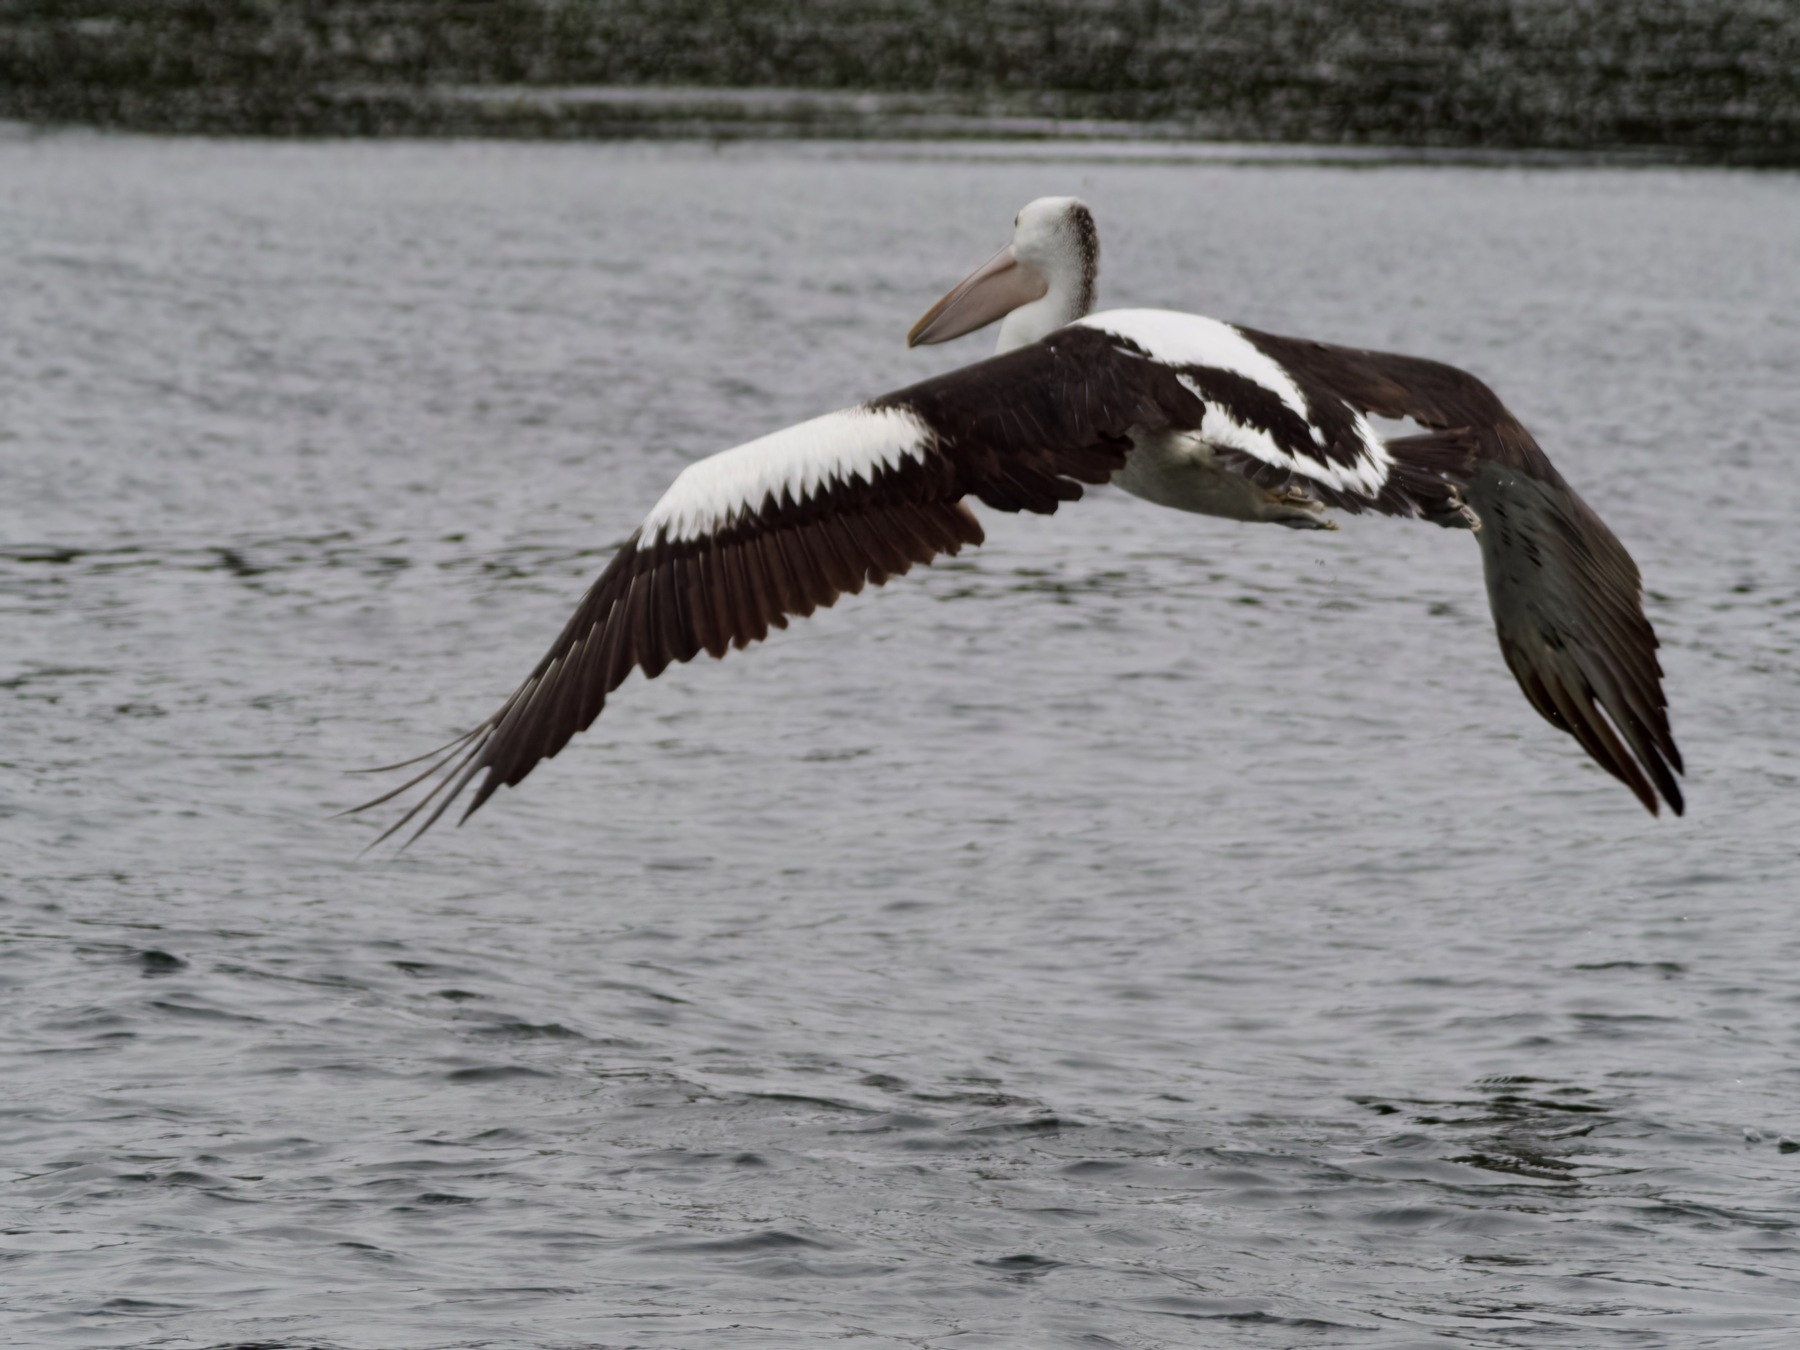 A pelican with a massive wingspan glides above the surface of a creek.